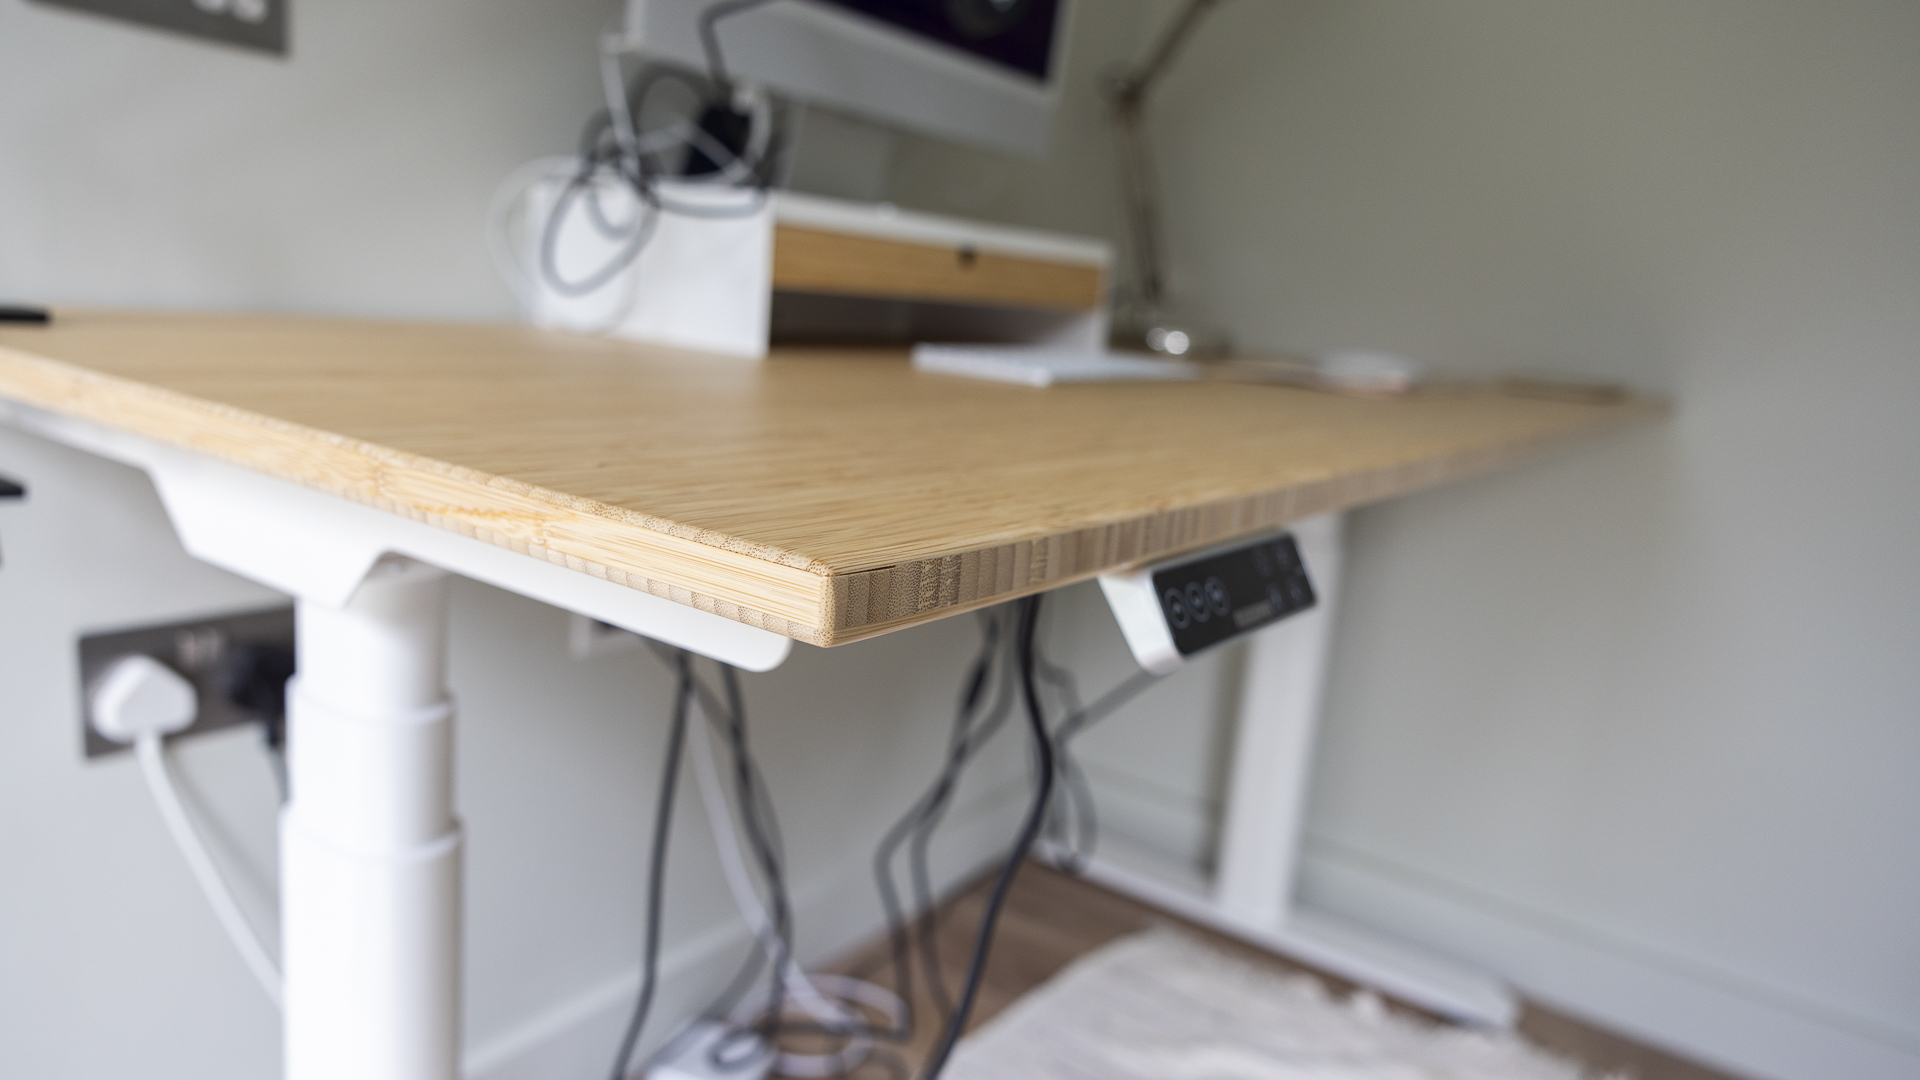 Flexispot E8 Standing Desk review image showing one of its corners.